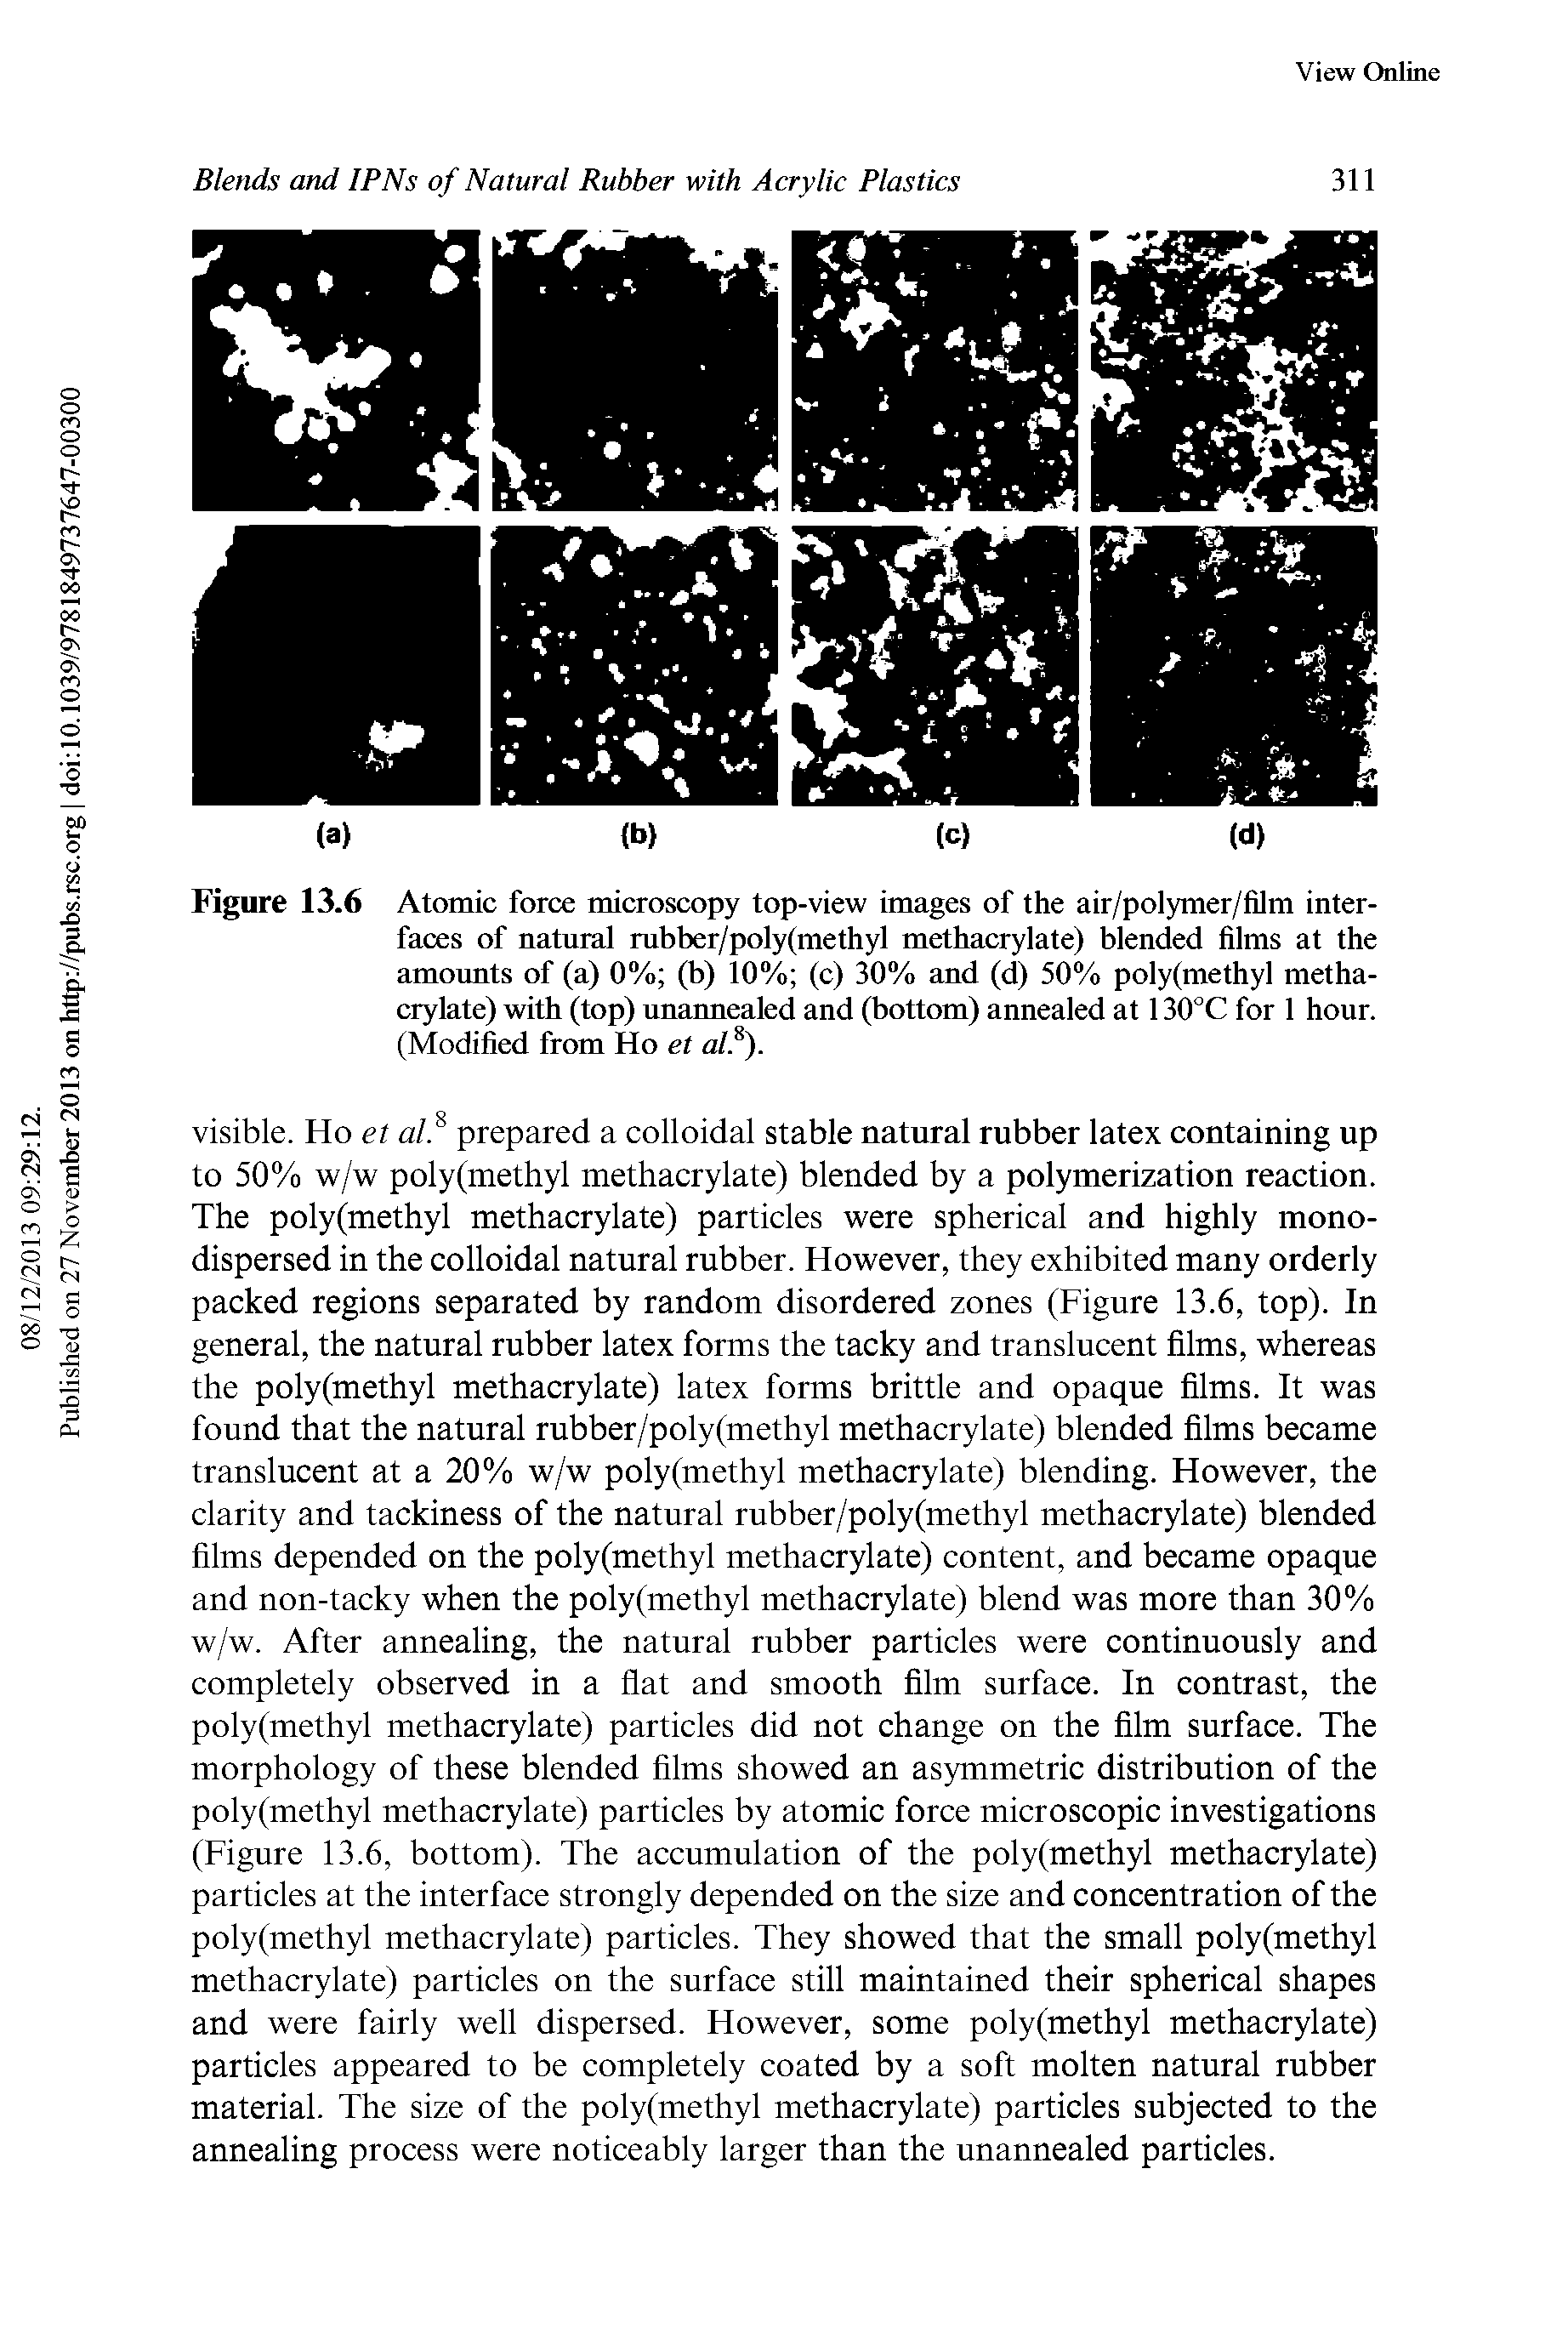 Figure 13.6 Atomic force microscopy top-view images of the air/polymer/film interfaces of natural rubber/poly(methyl methacrylate) blended films at the amounts of (a) 0% (b) 10% (c) 30% and (d) 50% poly(methyl methacrylate) with (top) unannealed and (bottom) annealed at 130°C for 1 hour. (Modified from Ho et al. ).